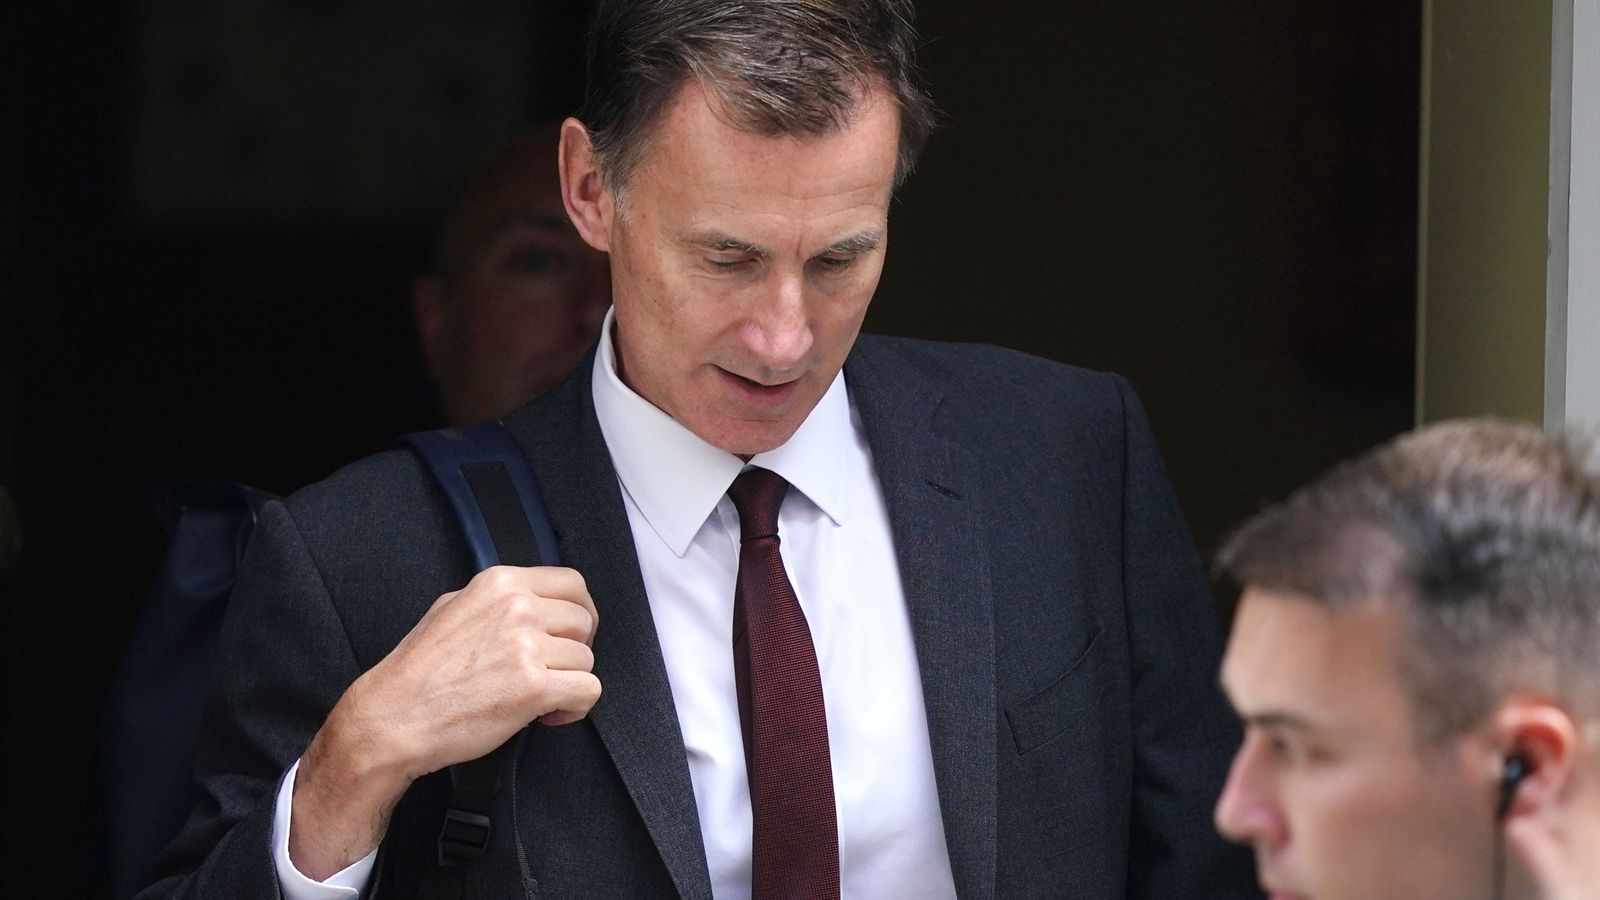 Chancellor Jeremy Hunt sets out stall to halt 'vicious circle' of tax hikes as pressure mounts